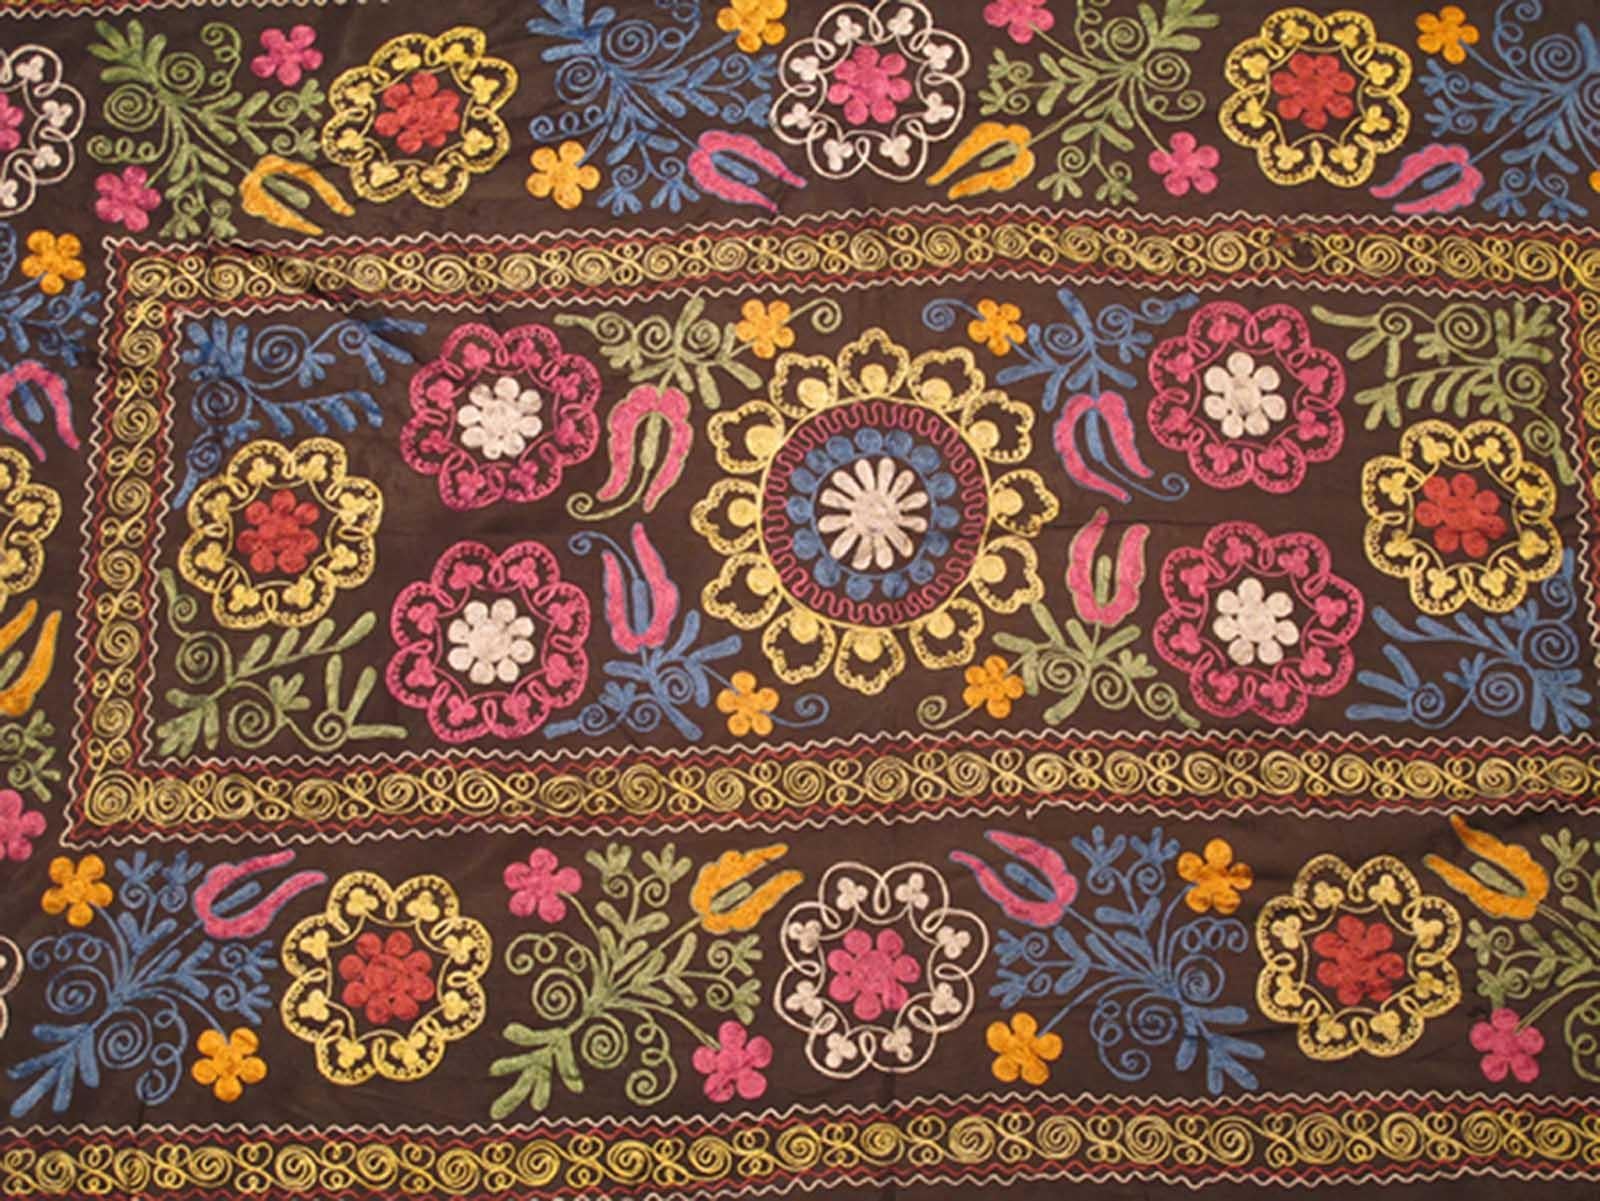 Uzbek Embroidery Suzani with Floral Design and Beautiful Vivid Colors For Sale